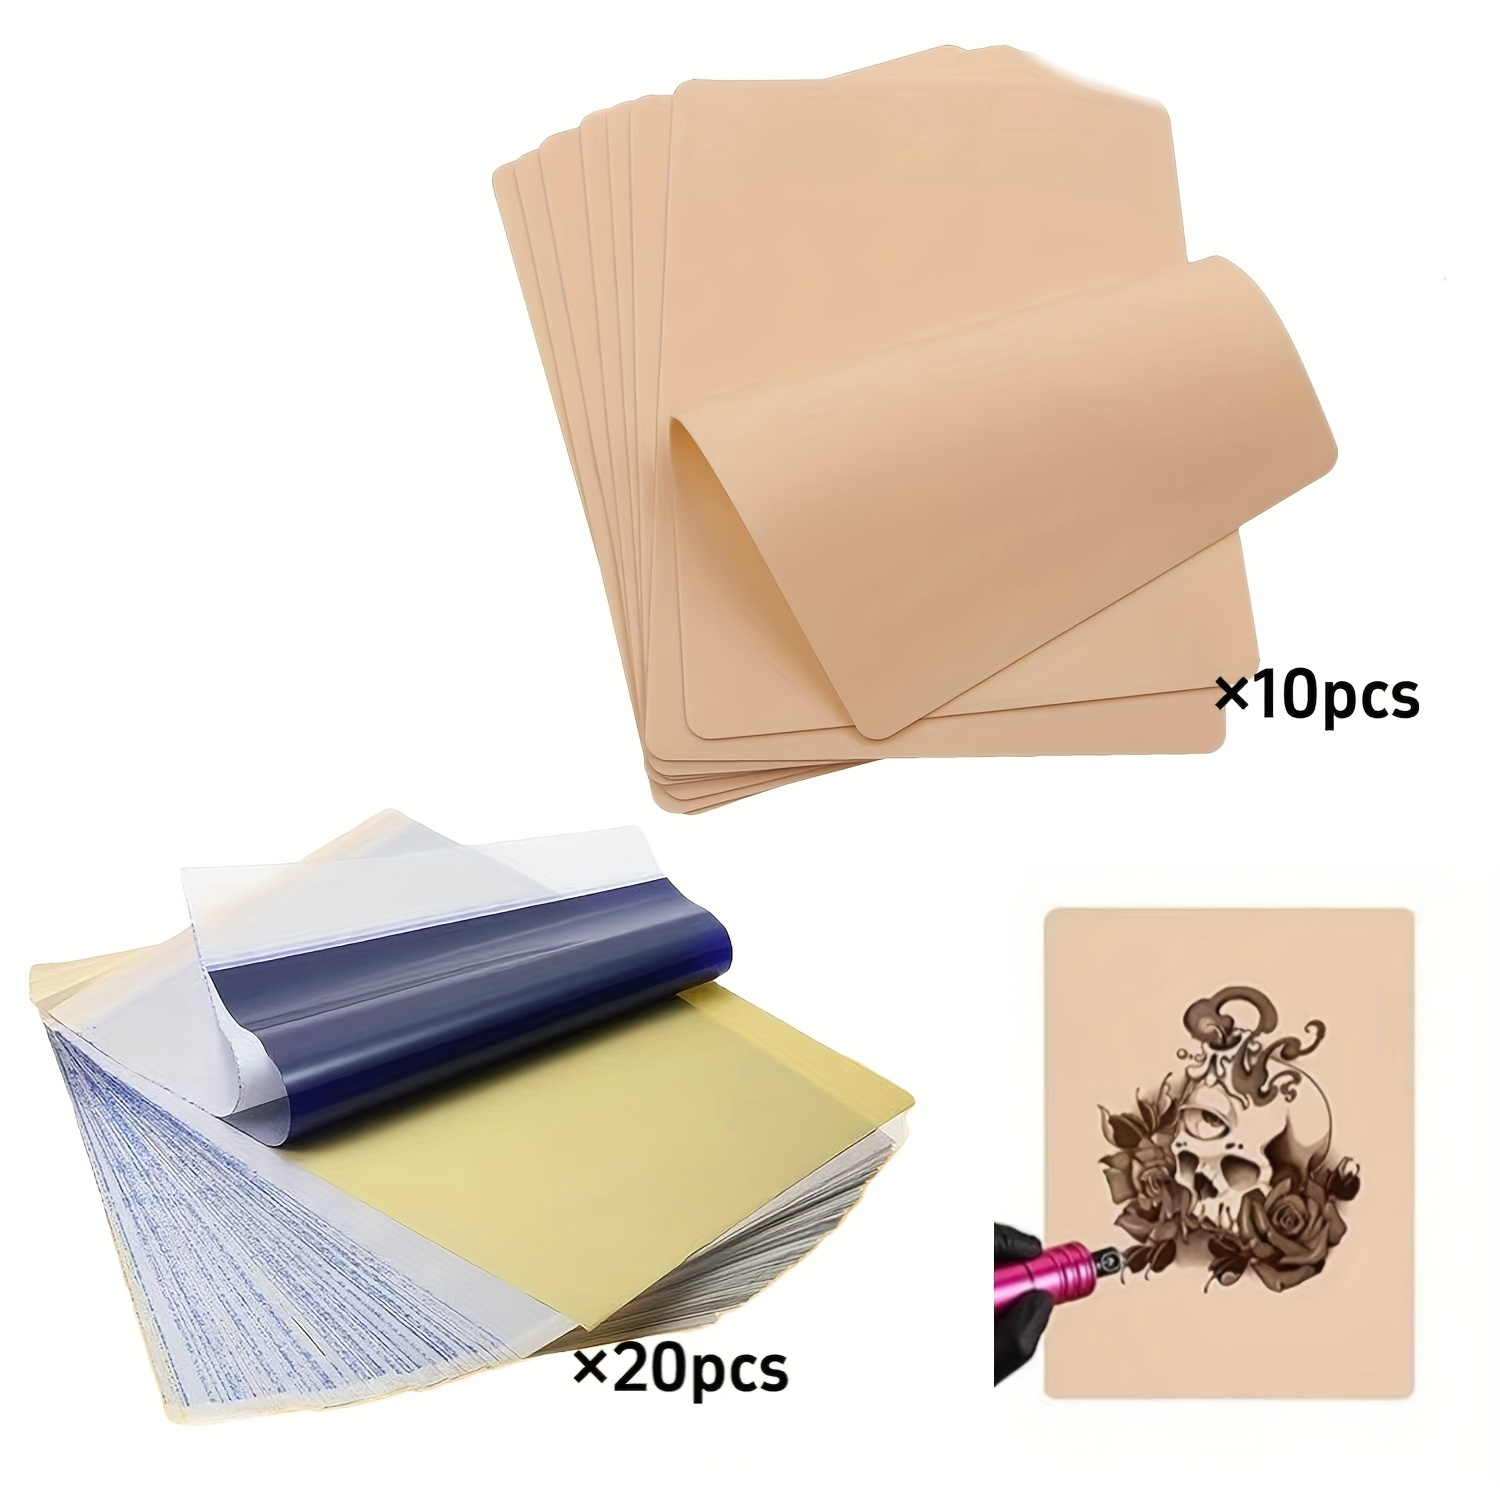 

30pcs Set Of Tattoo Skin Practice And Transfer Paper Sets, Including 10pcs Double-sided Blank Fake Skin, 20pcs Tattoo Transfer Paper, Tattoo Practice Supplies